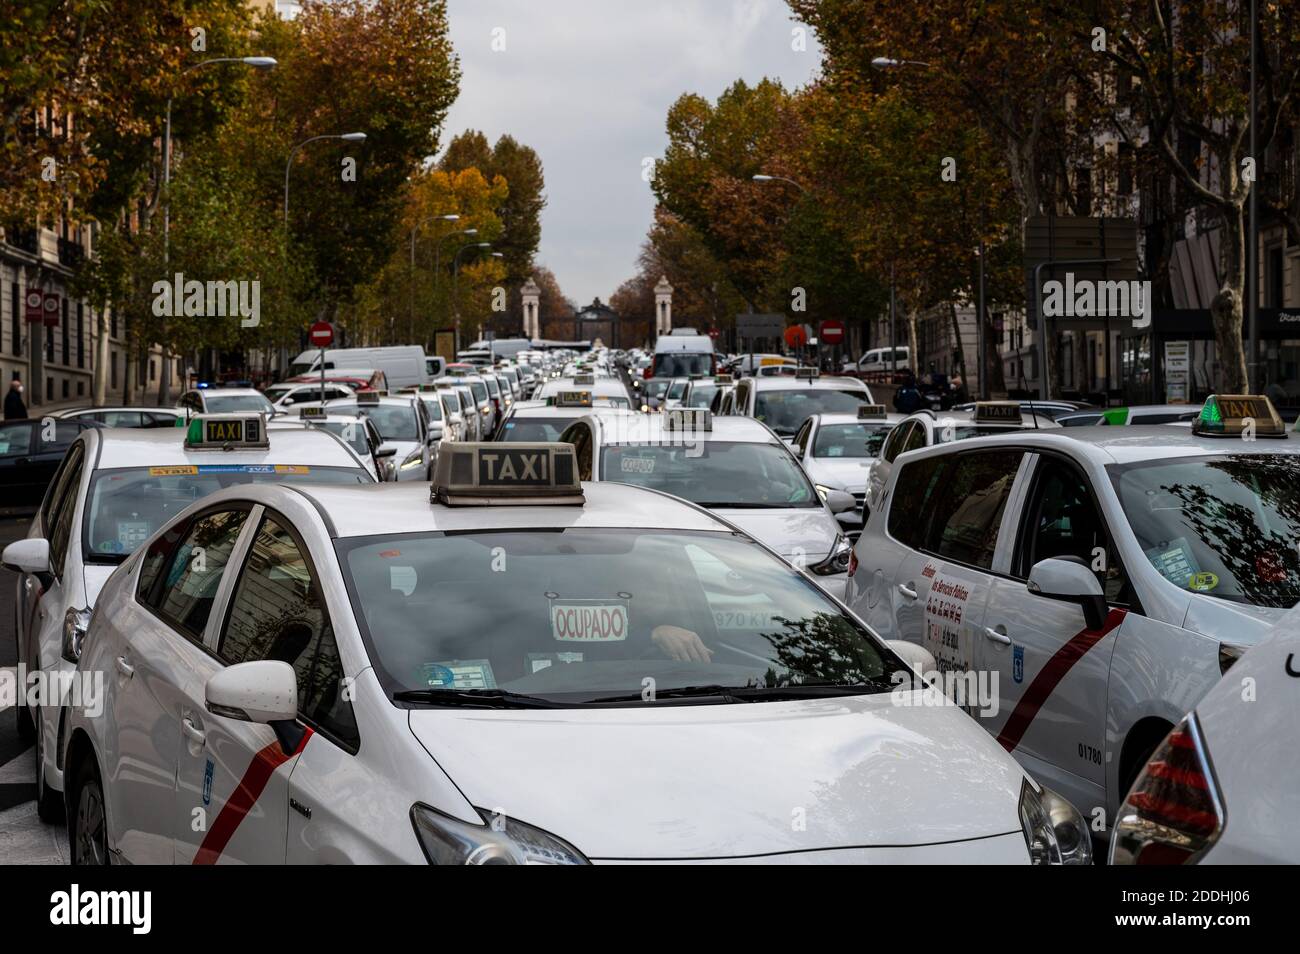 Madrid, Spain. 25th Nov, 2020. Taxi drivers demonstrate with their vehicles driving through downtown Madrid collapsing traffic demanding regulations and economic aid as the Coronavirus (COVID-19) pandemic has hit hard on their sector. Credit: Marcos del Mazo/Alamy Live News Stock Photo